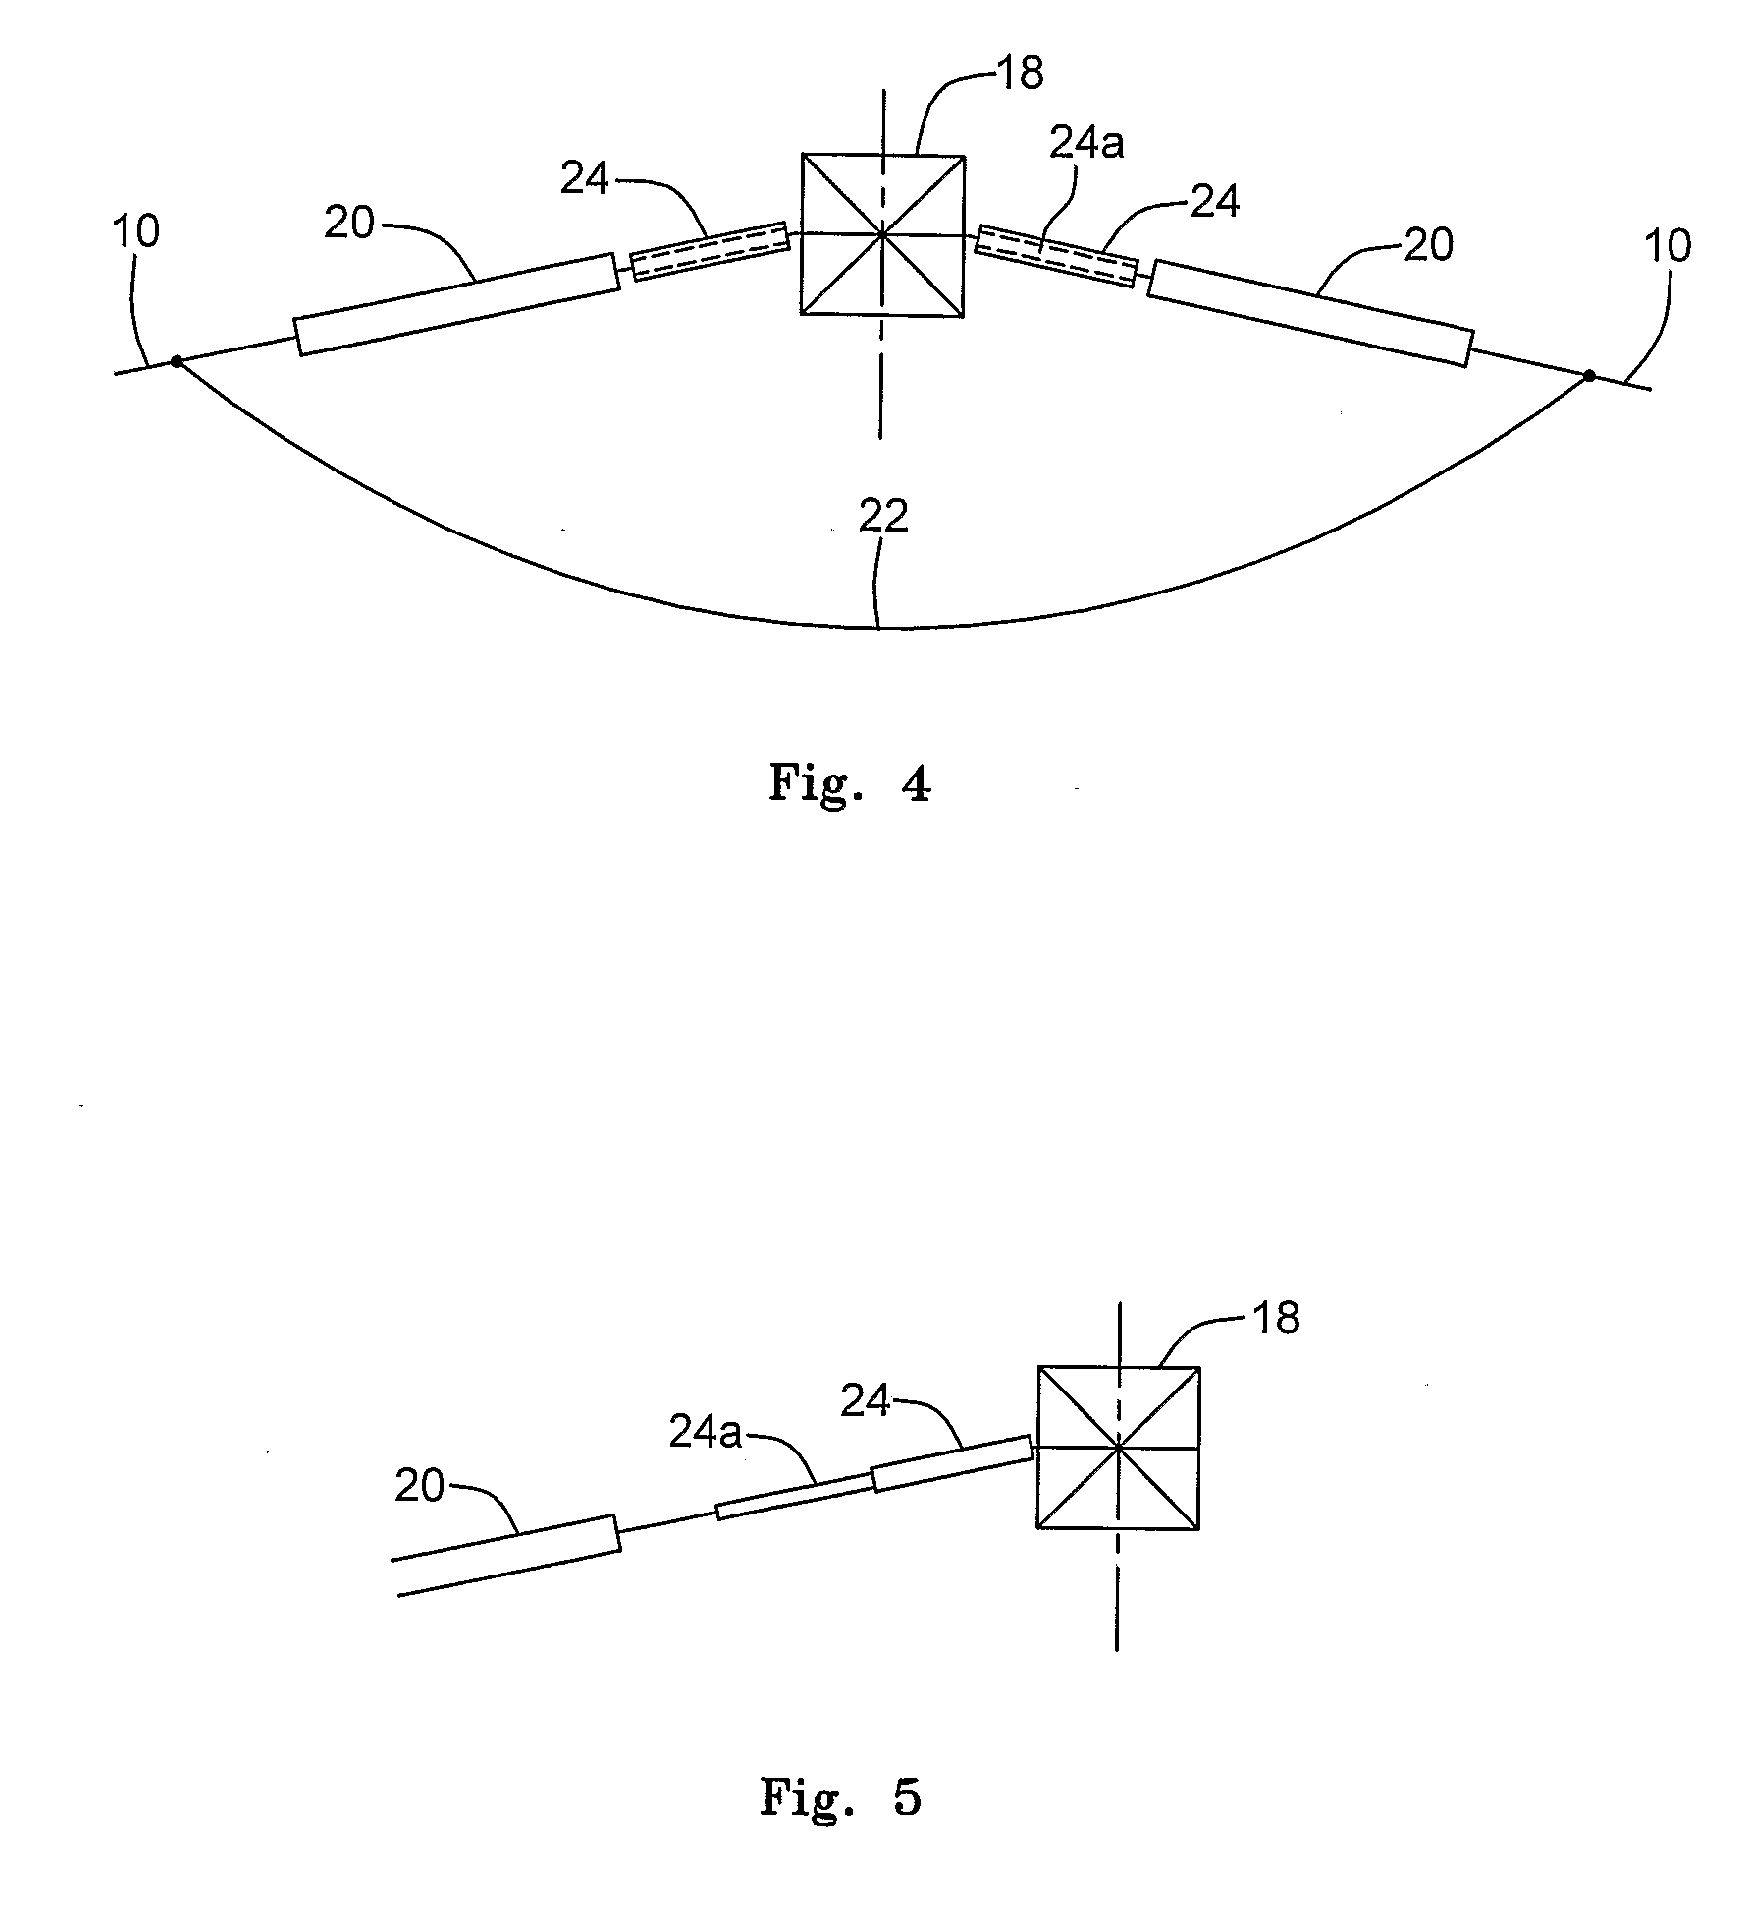 Systems and Methods For Stabilizing Cables Under Heavy Loading Conditions